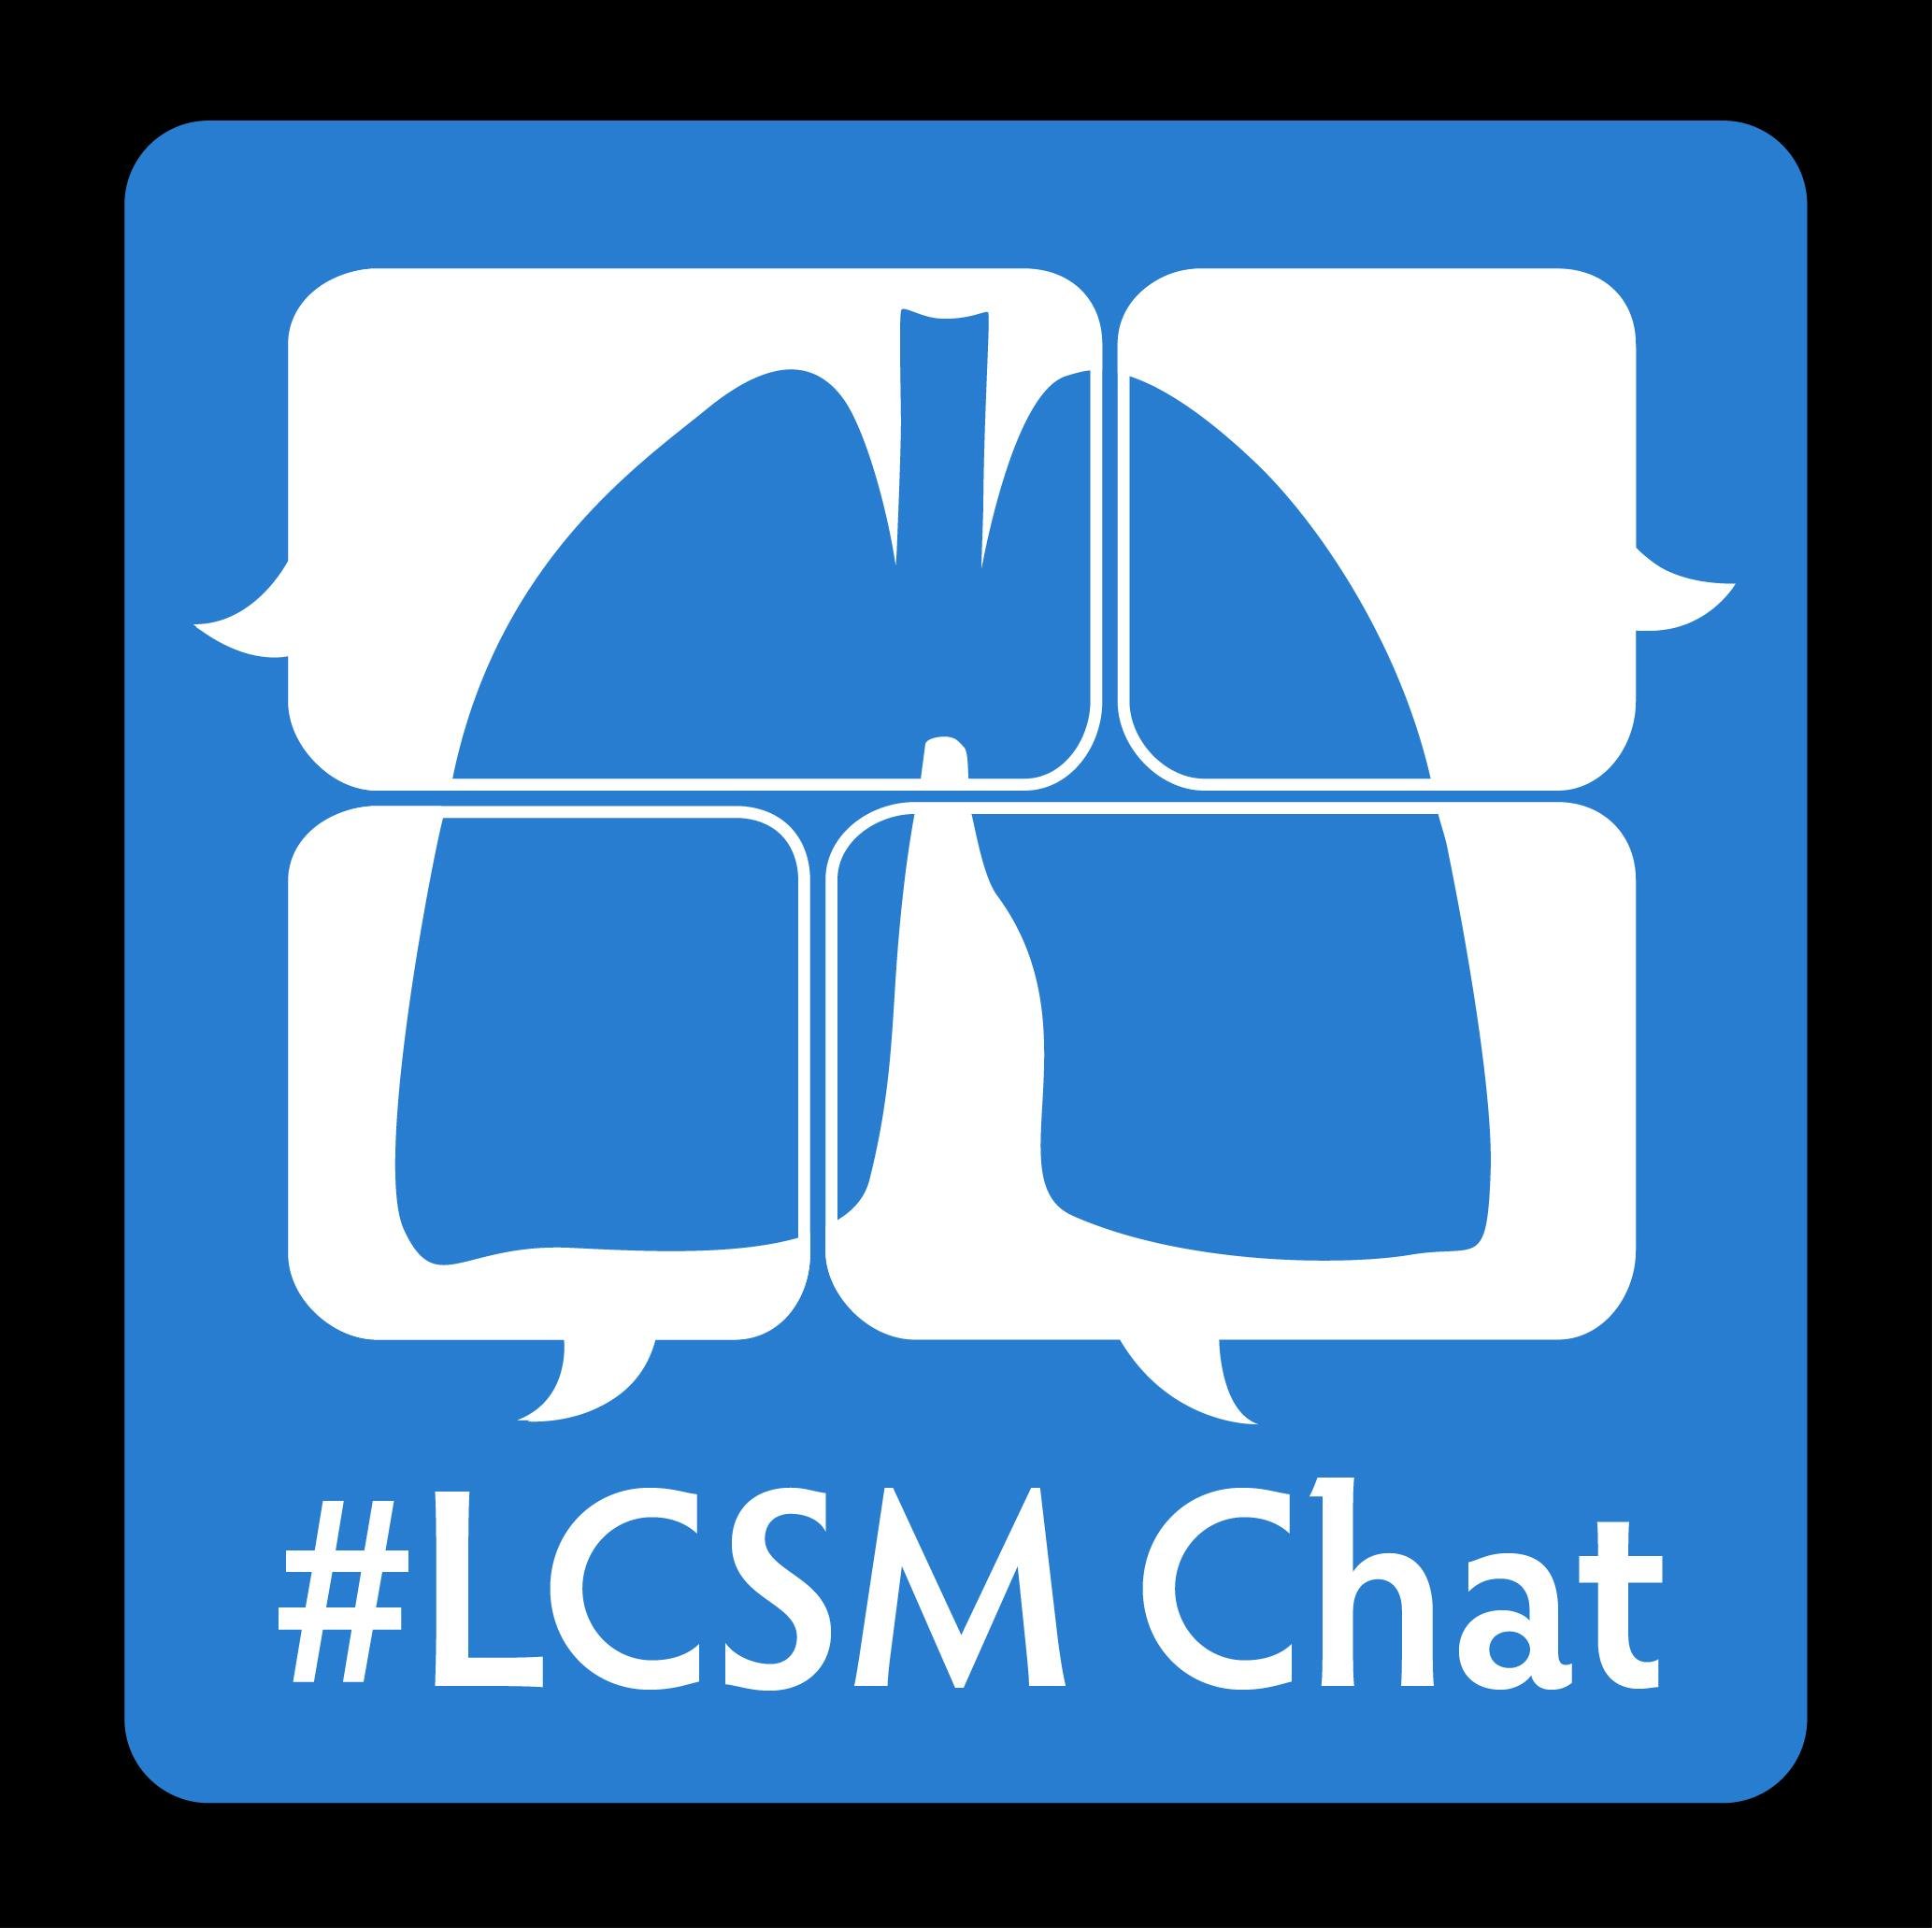 Final #LCSM Chat was 12/2/21. This account will remain, but is no longer active or monitored. Thank you to everyone for 8 great years! #LungCancer #LCSM